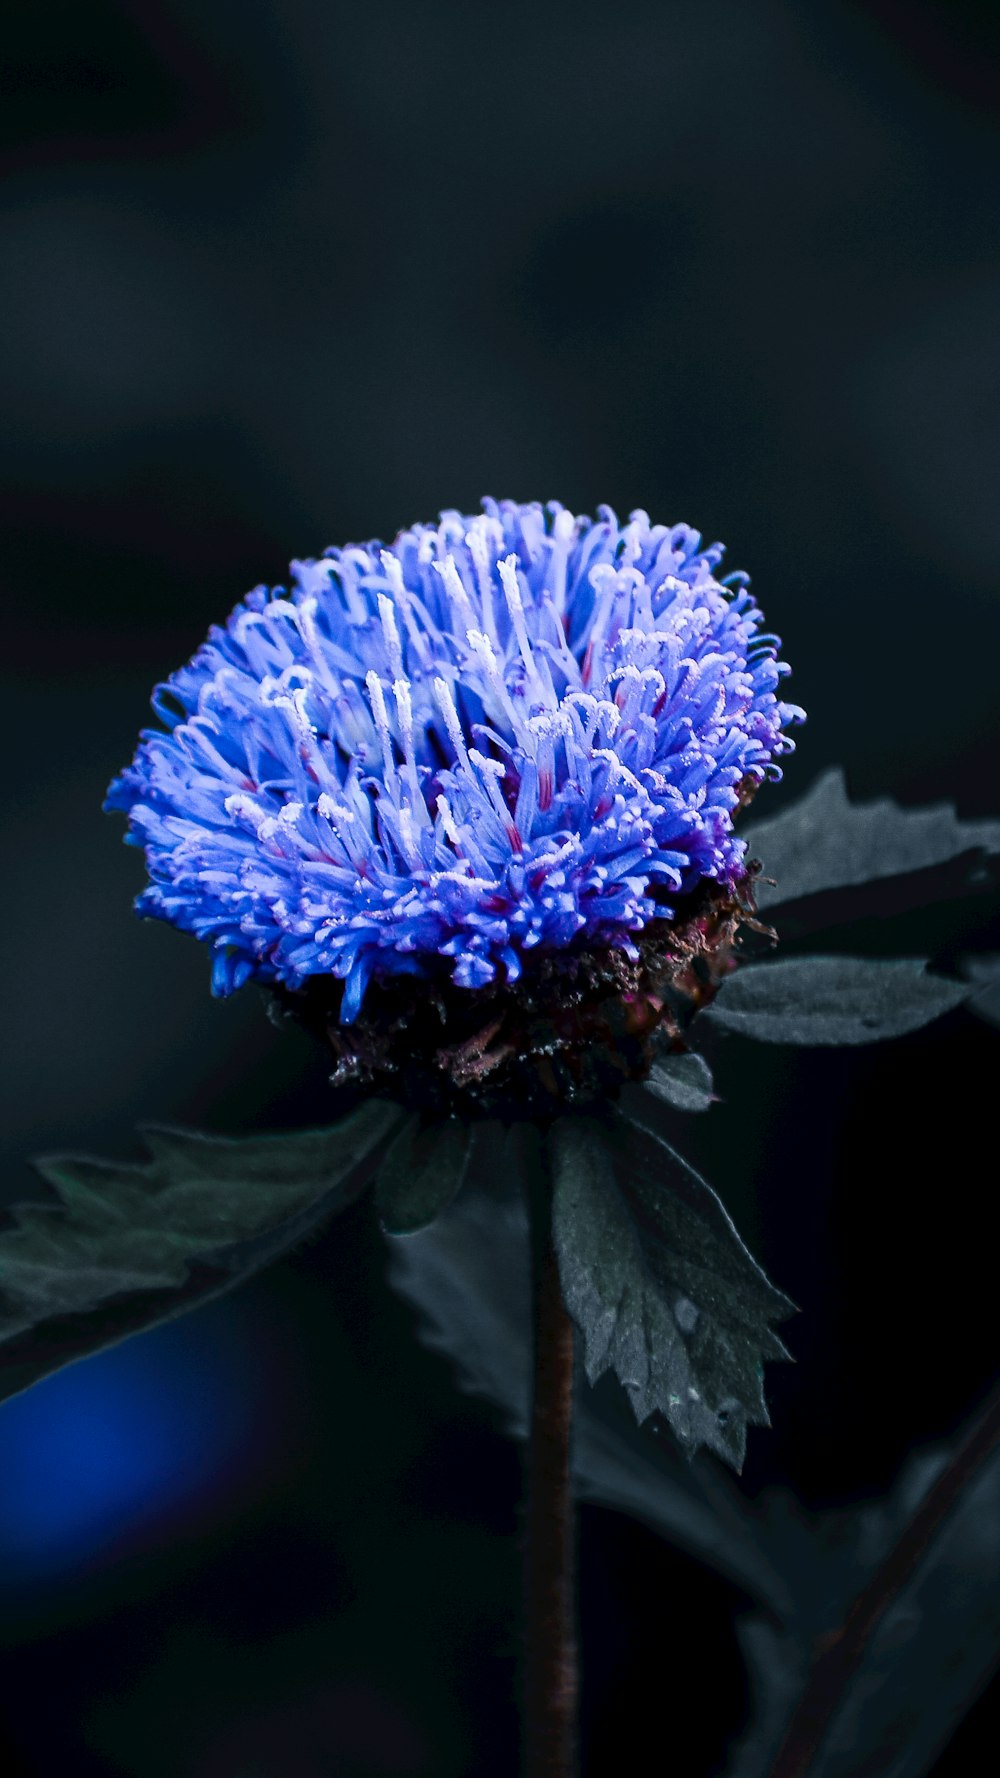 a close up of a blue flower on a dark background